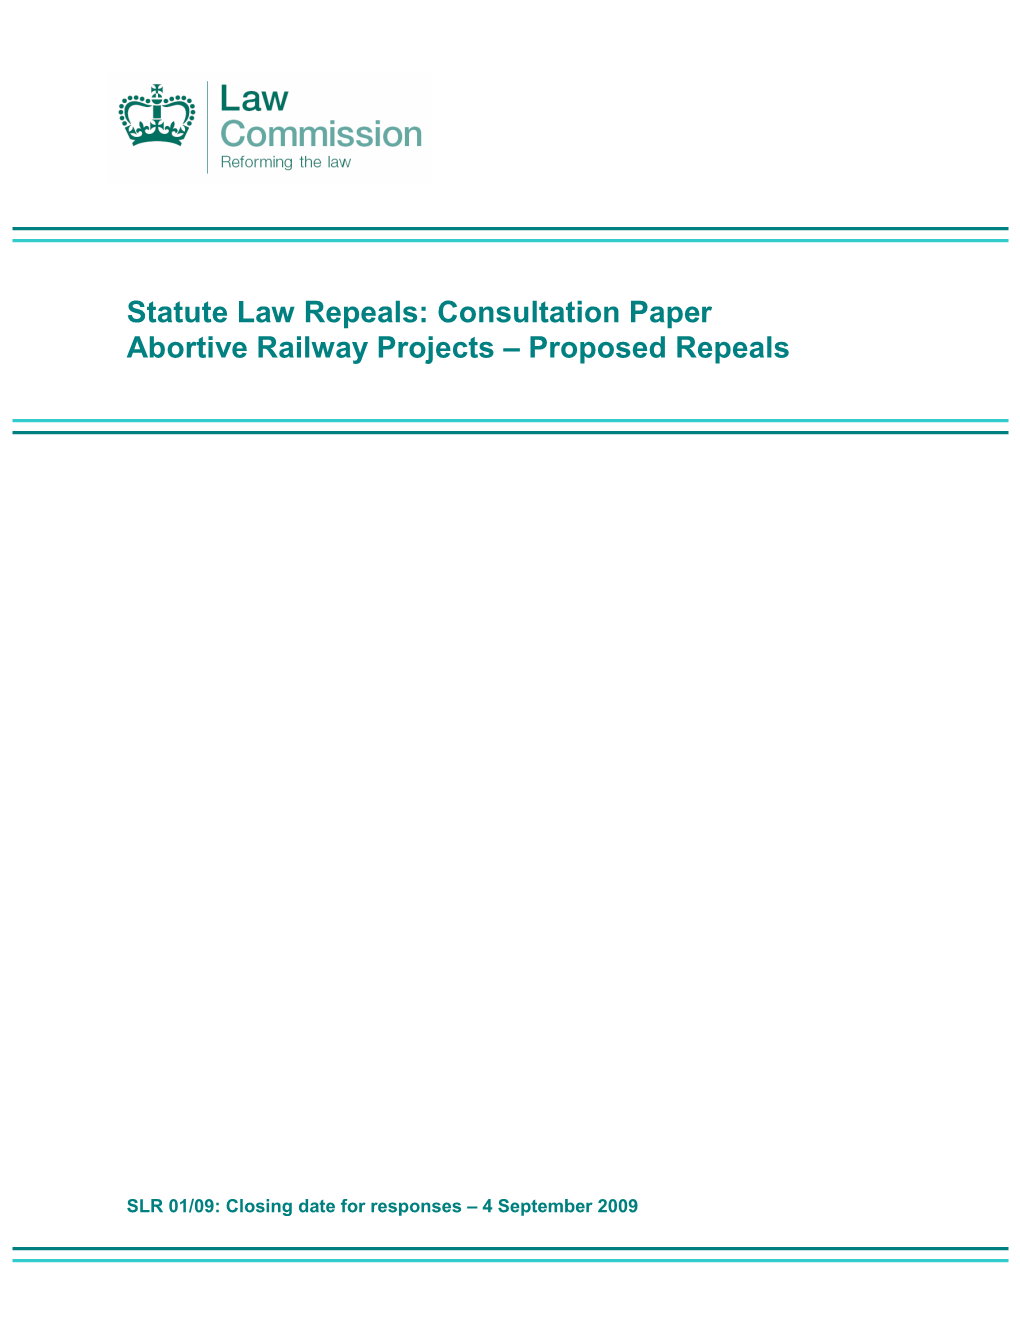 Statute Law Repeals: Consultation Paper Abortive Railway Projects – Proposed Repeals